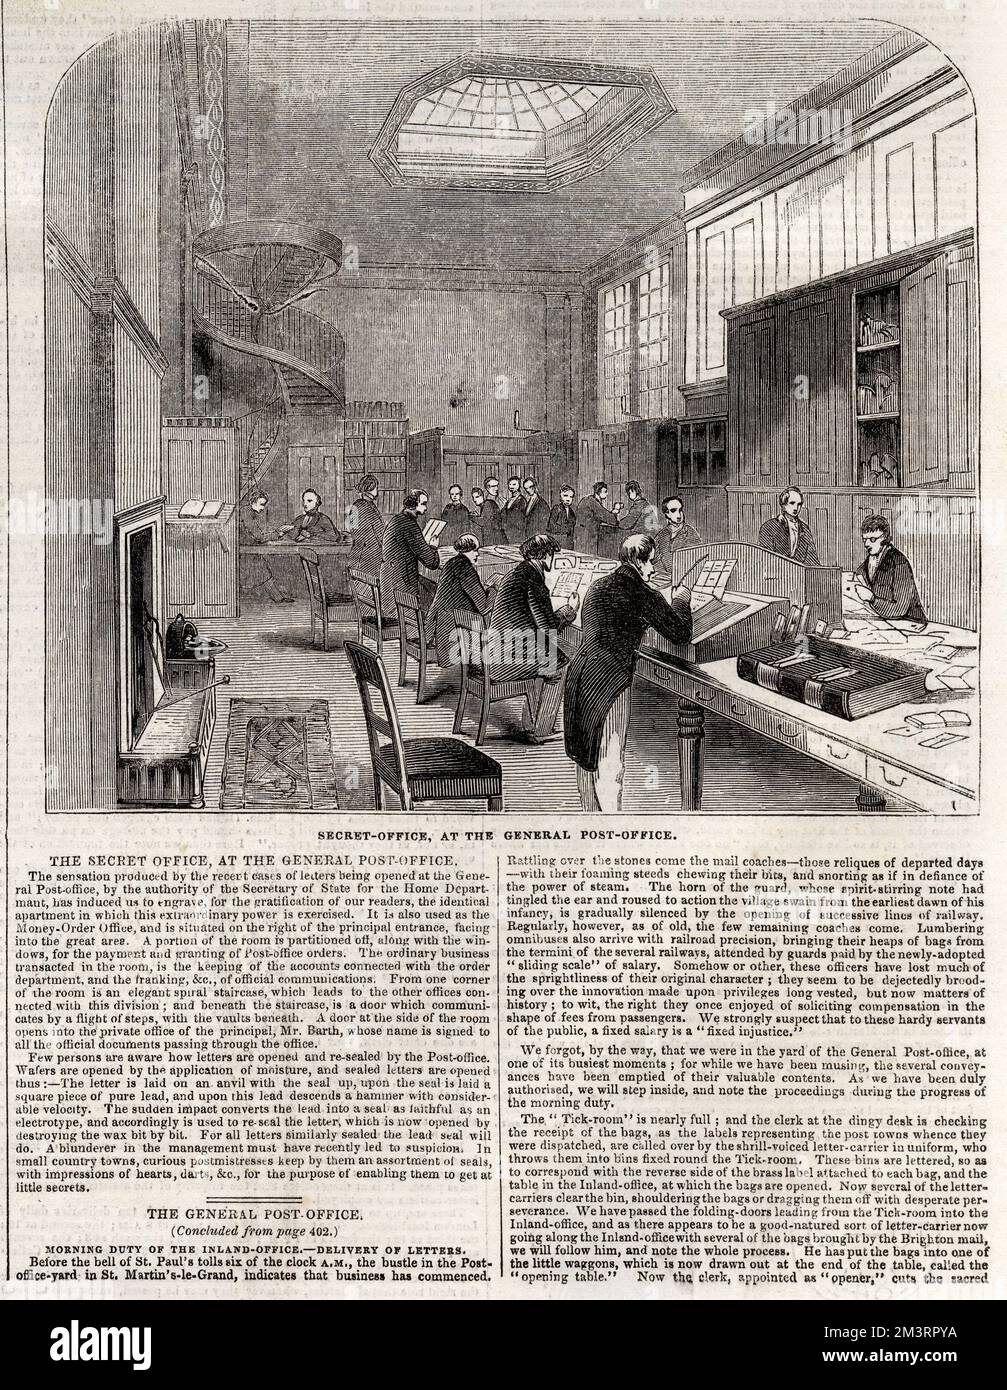 The Secret Office, at the General Post Office in London, 1844.  Letters were opened and re-sealed in the Secret Office under the authority of the Secretary of State for the Home Department.  1844 Stock Photo